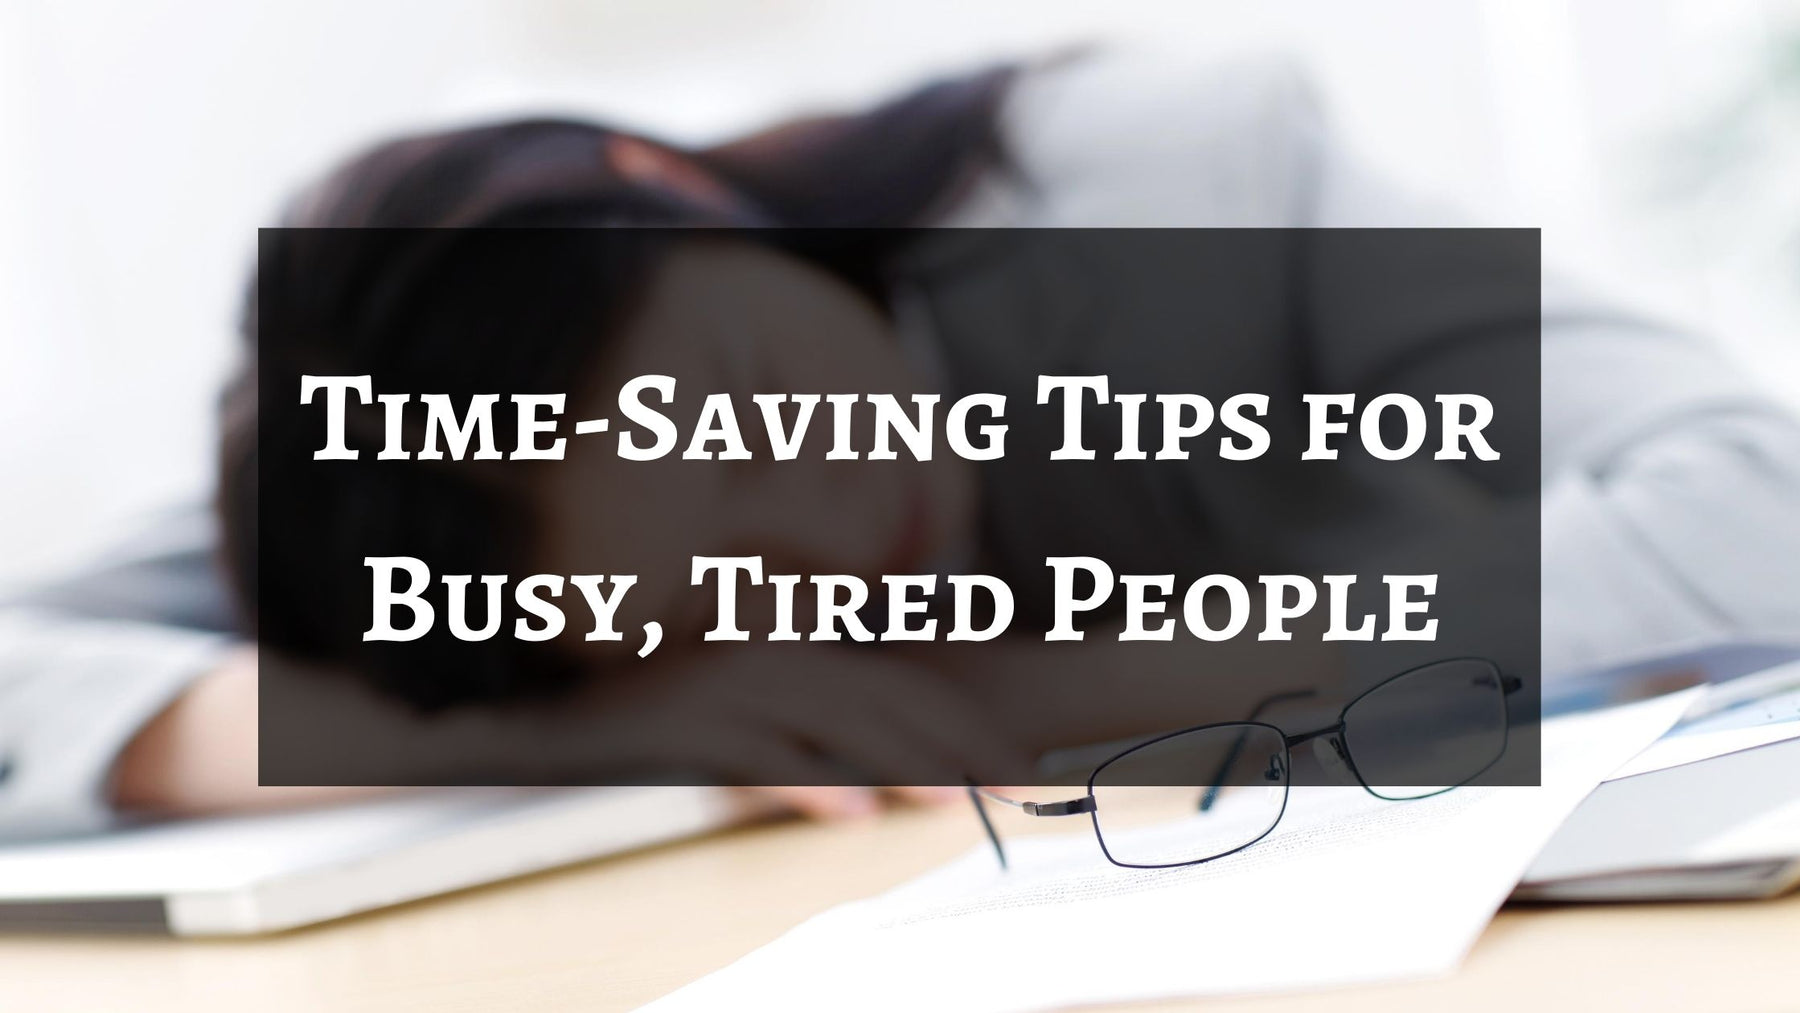 Time-Saving Tips for Busy, Tired People